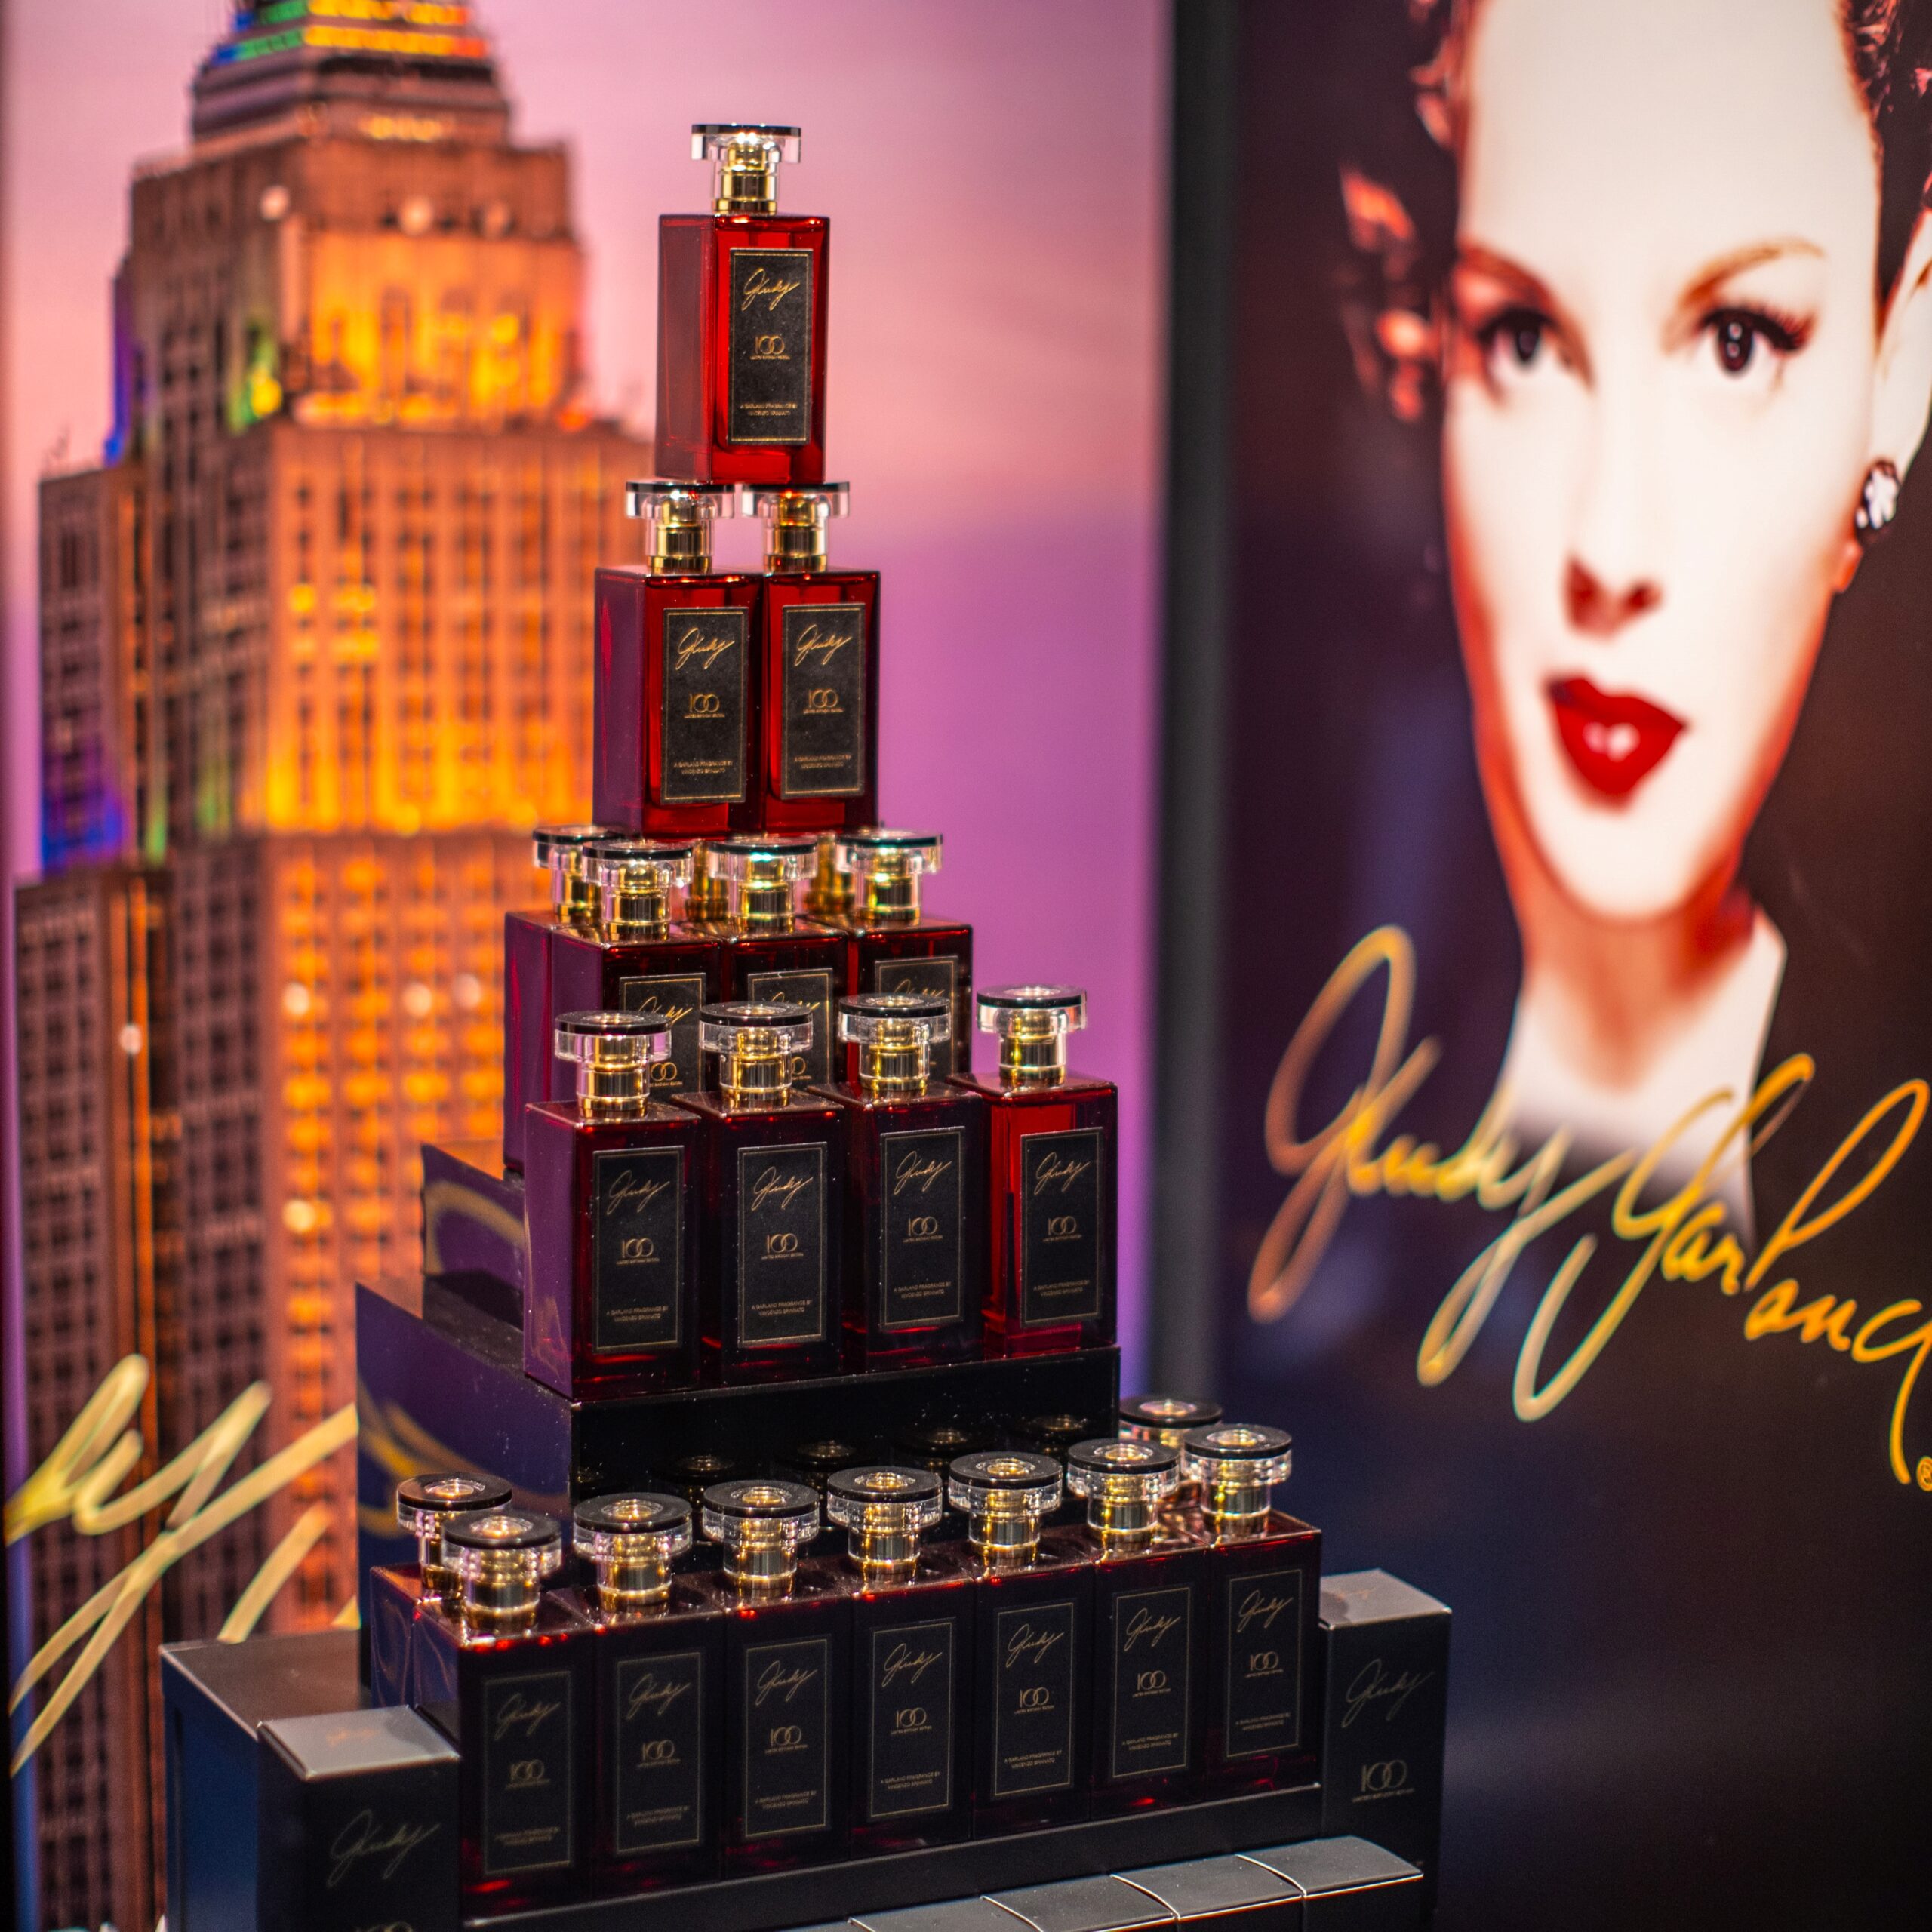 Judy Garland 100th Birthday Gala and Fragrance Reveal via She Grown Media for use by 360 Magazine